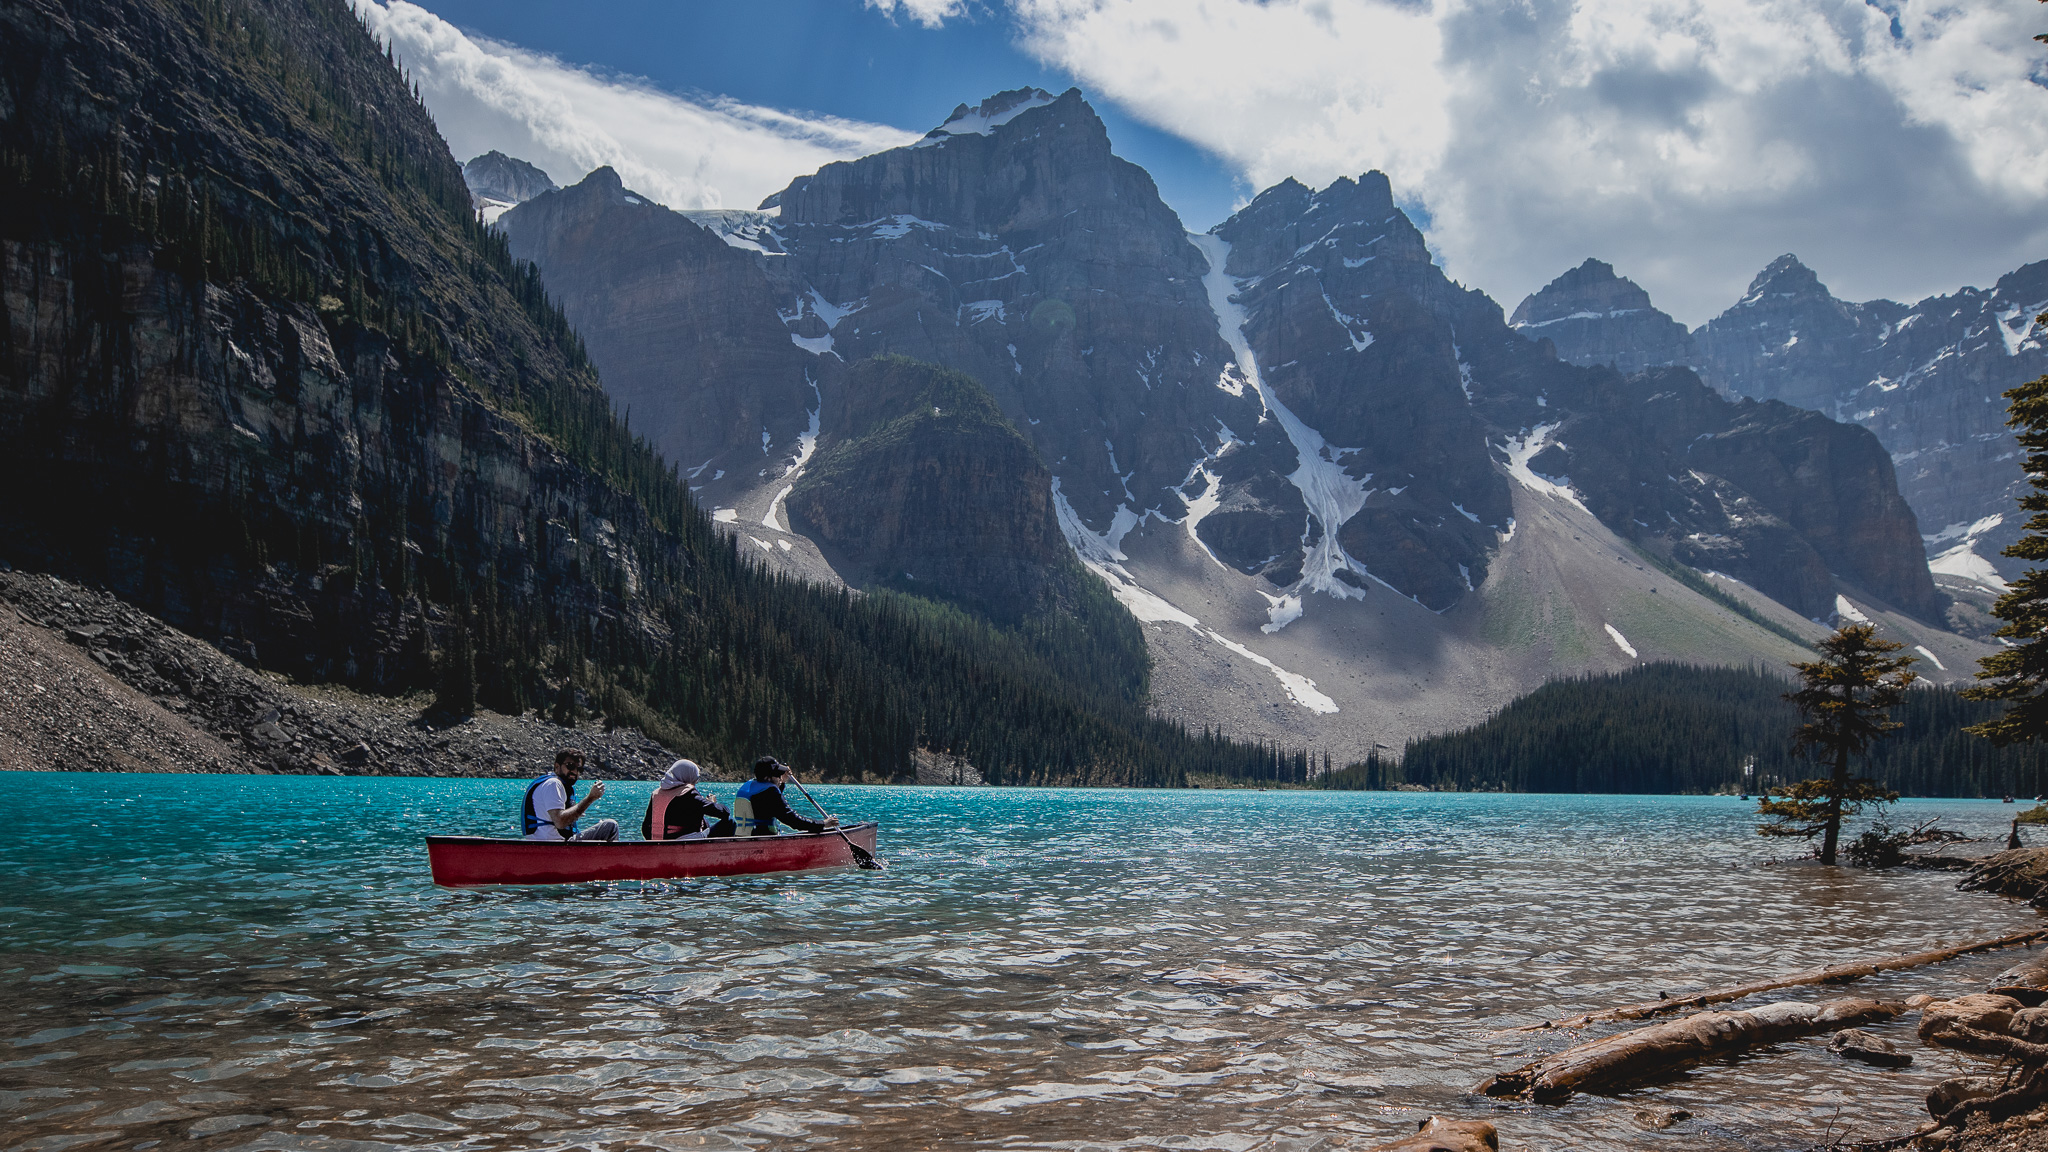 Jagged peaks tower above brilliant turquoise waters at Lake Moraine. As you sit and quietly contemplate their shapes and color, canoes provide a soft thump, clank, and splash, alongside the gentle break of waves against the shore.